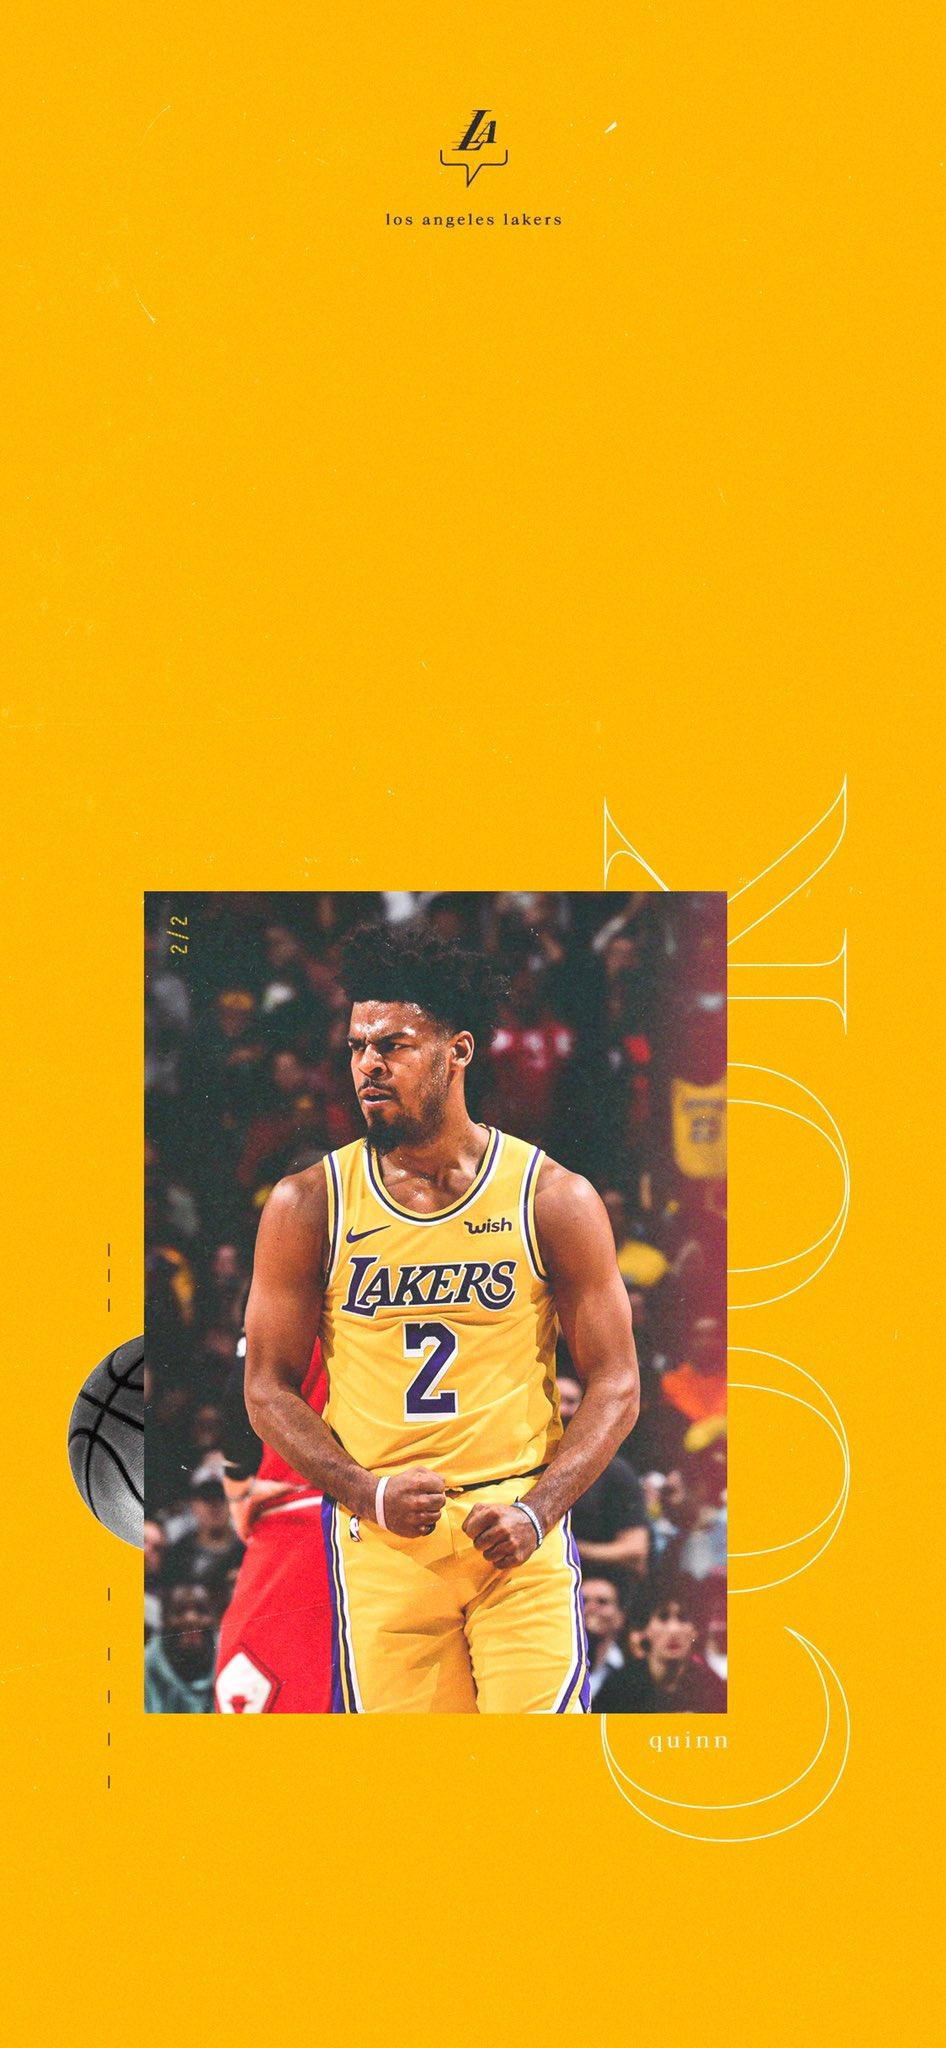 Los Angeles Lakers, hot off